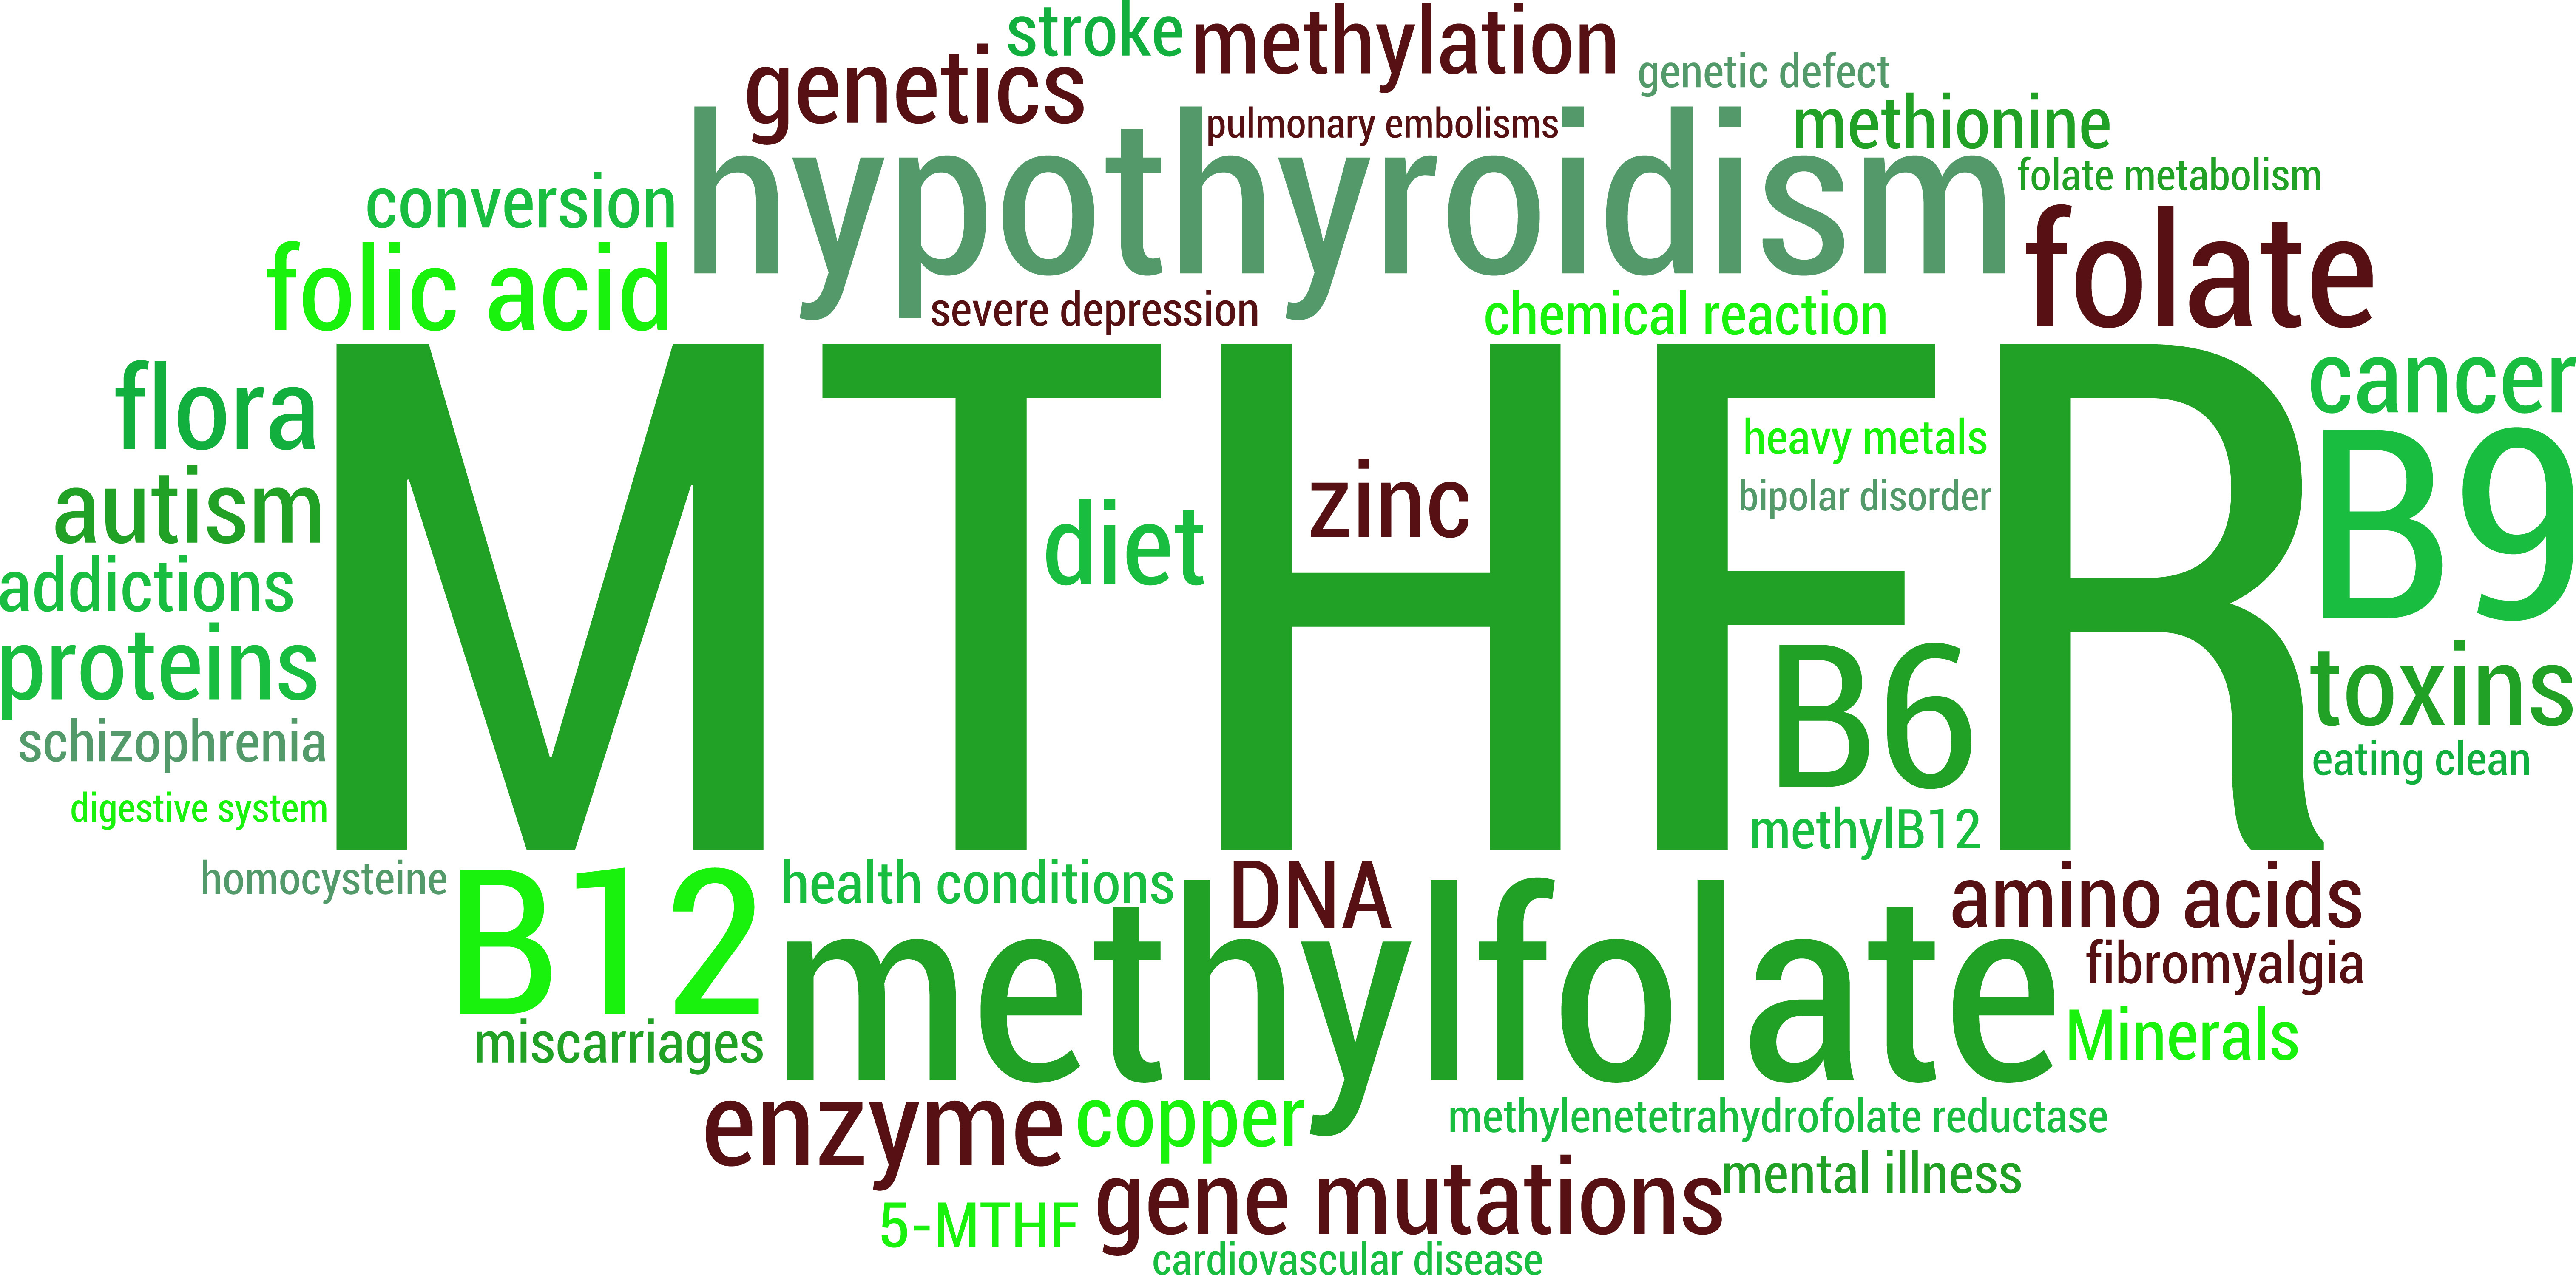 Excessive Homocysteine level can be a symptom of MTHFR mutation. Did you check if you have one? Even 50% of population can have this mutation!